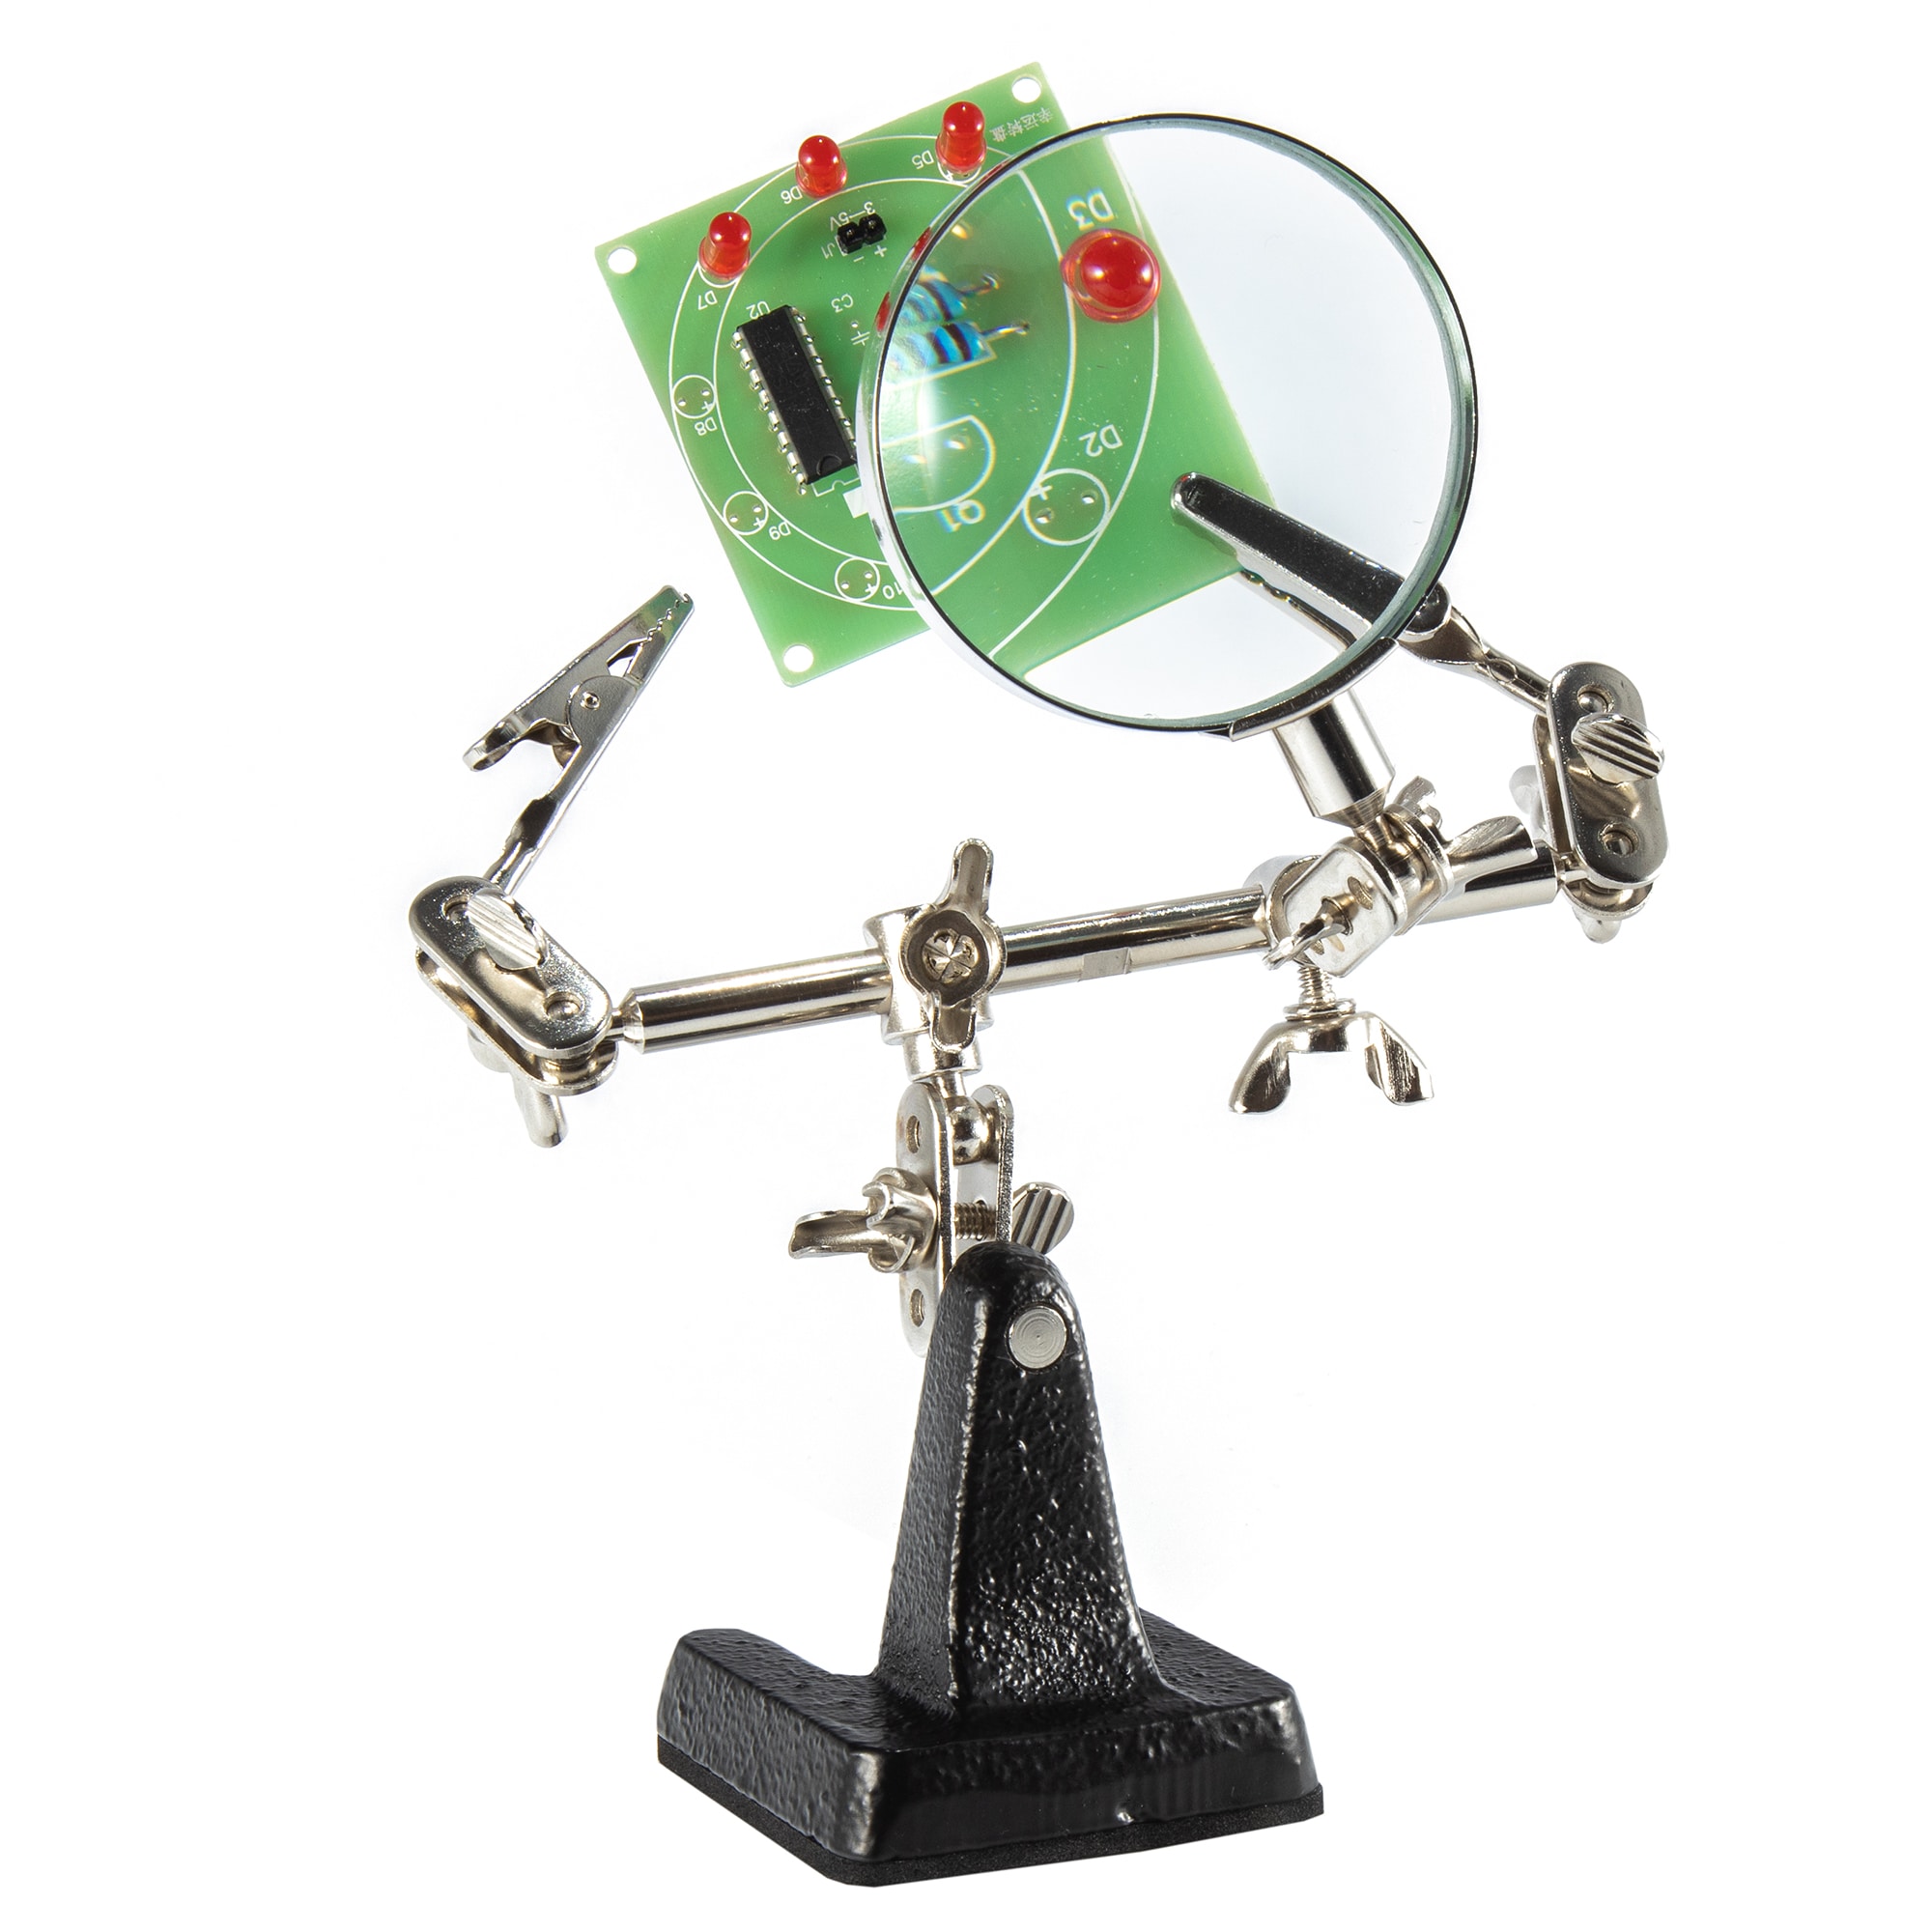 Hobby Magnifying Glass with Light Helping Hands Station with Led Light - 4X  Free Magnifier Stand with Clamp and Alligator Clips - for Soldering